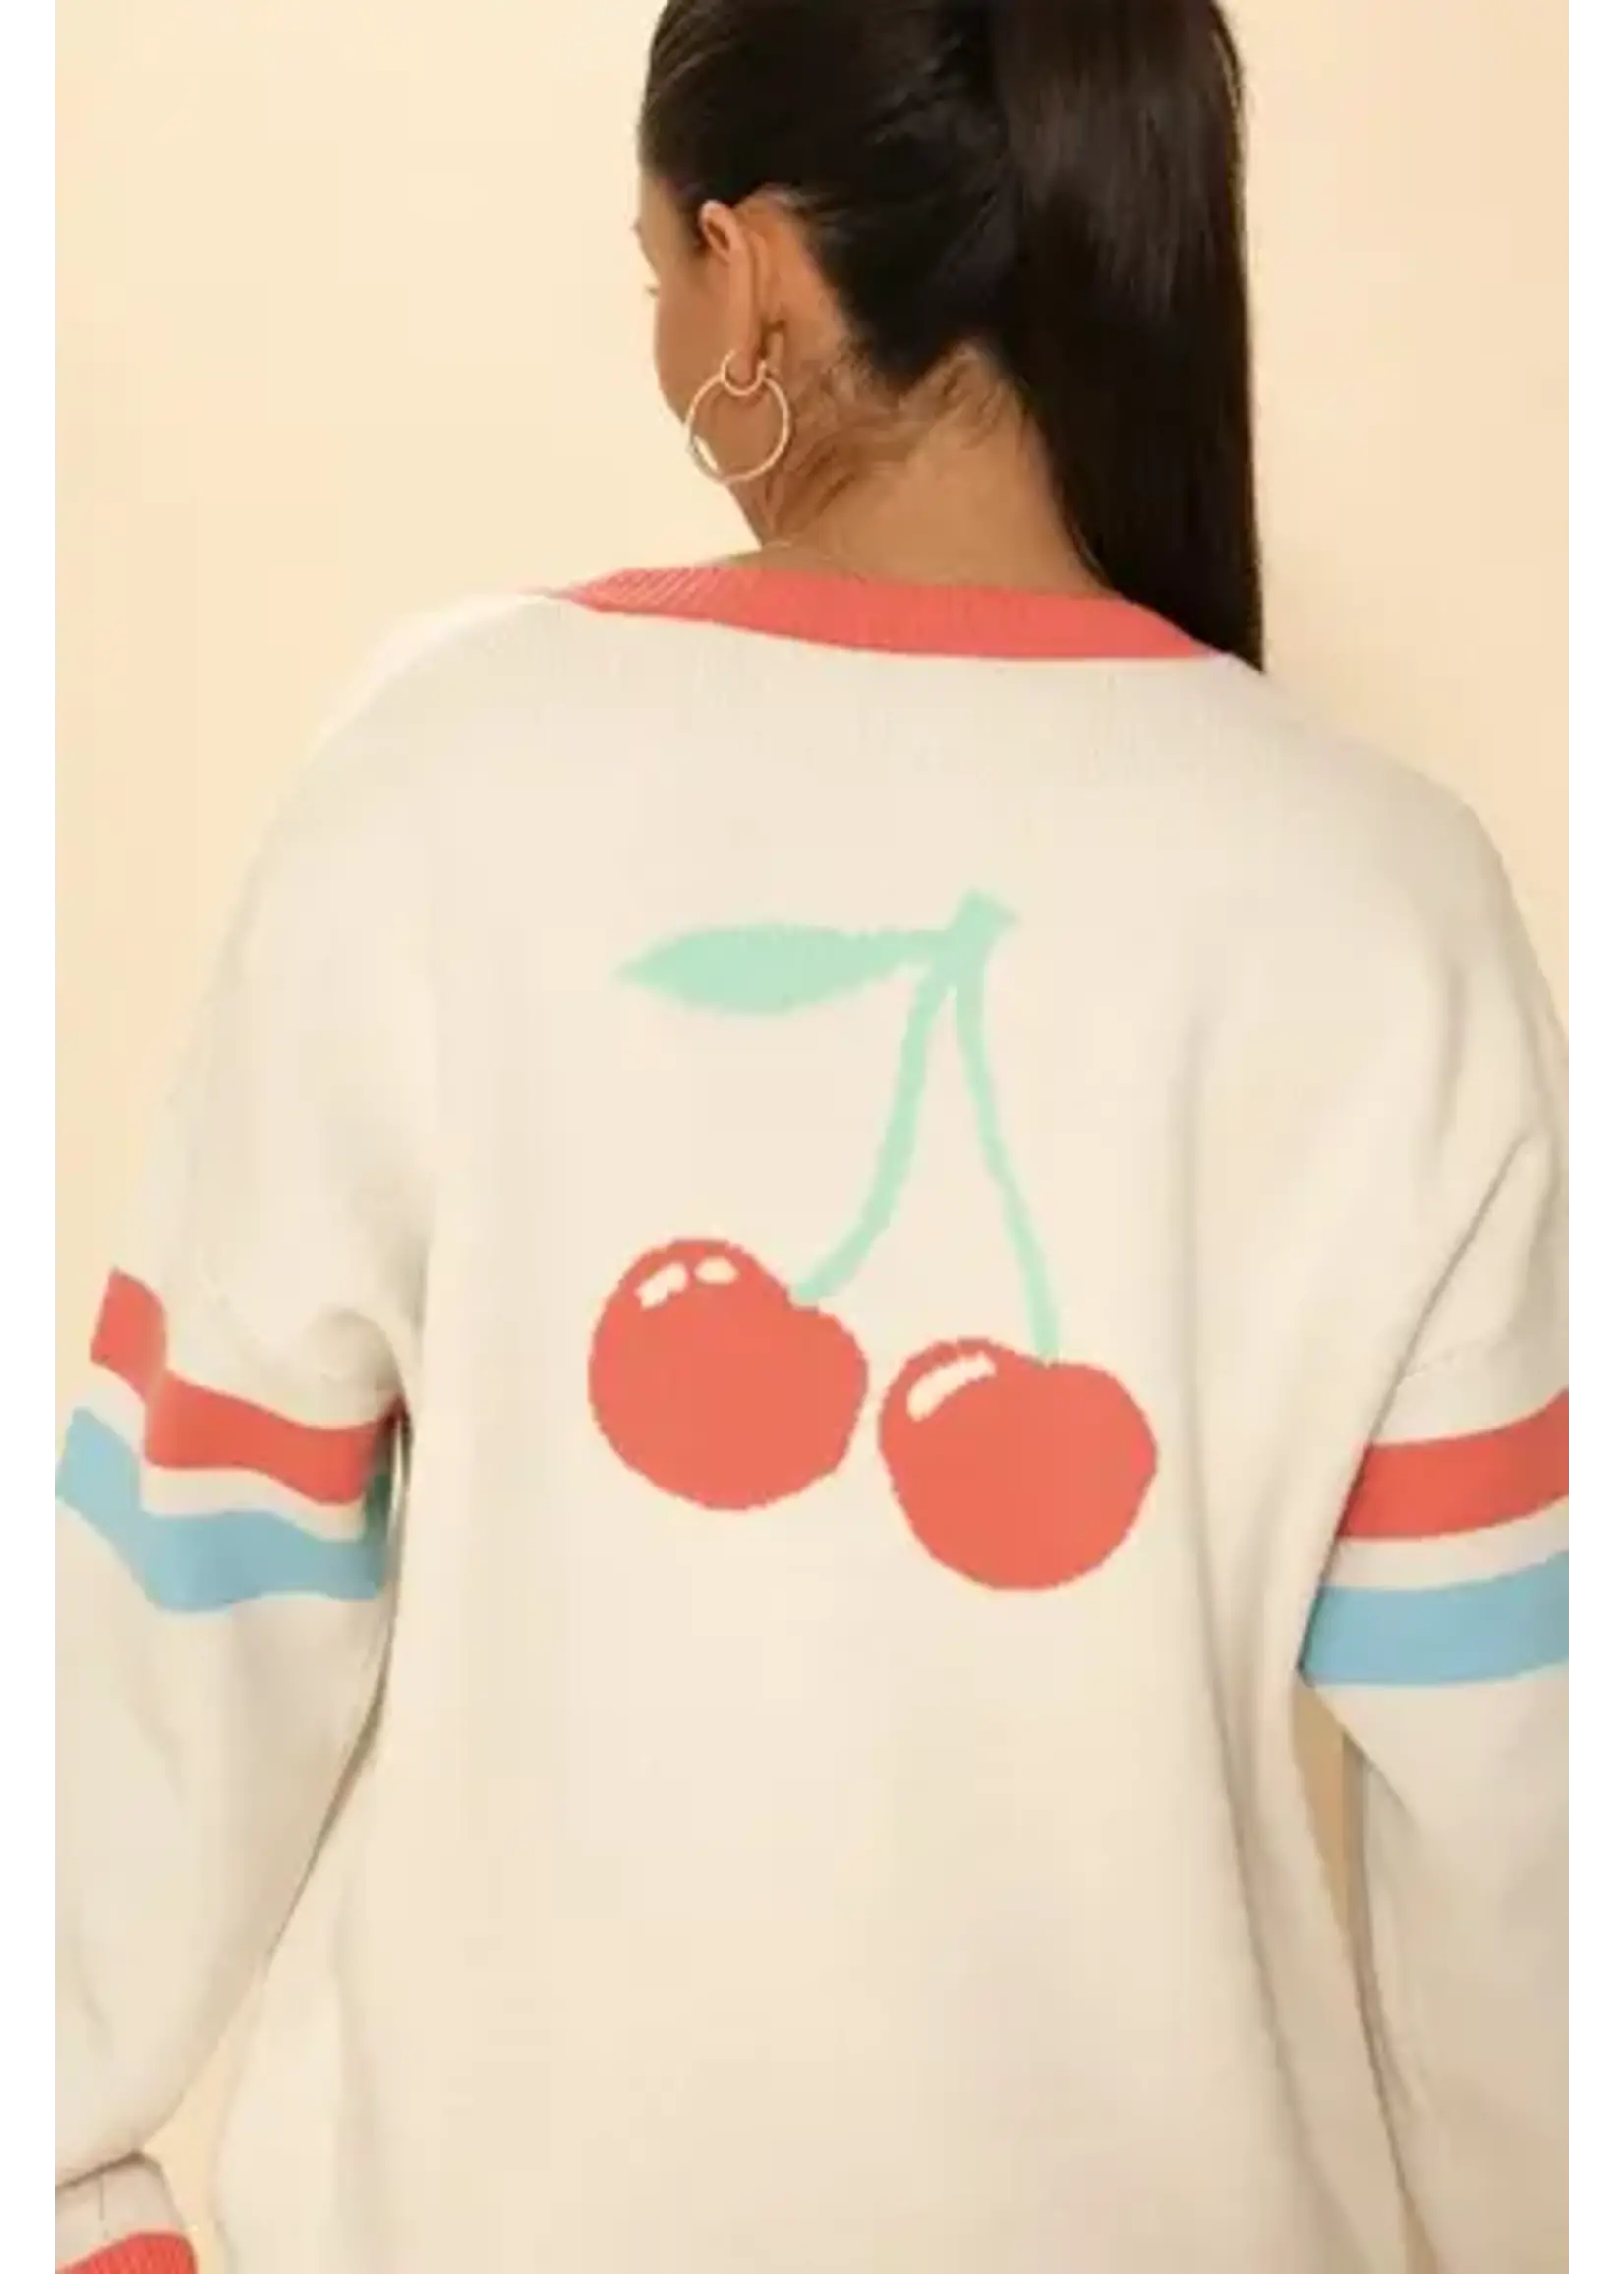 Miss Sparkling MS Cherry Sweater